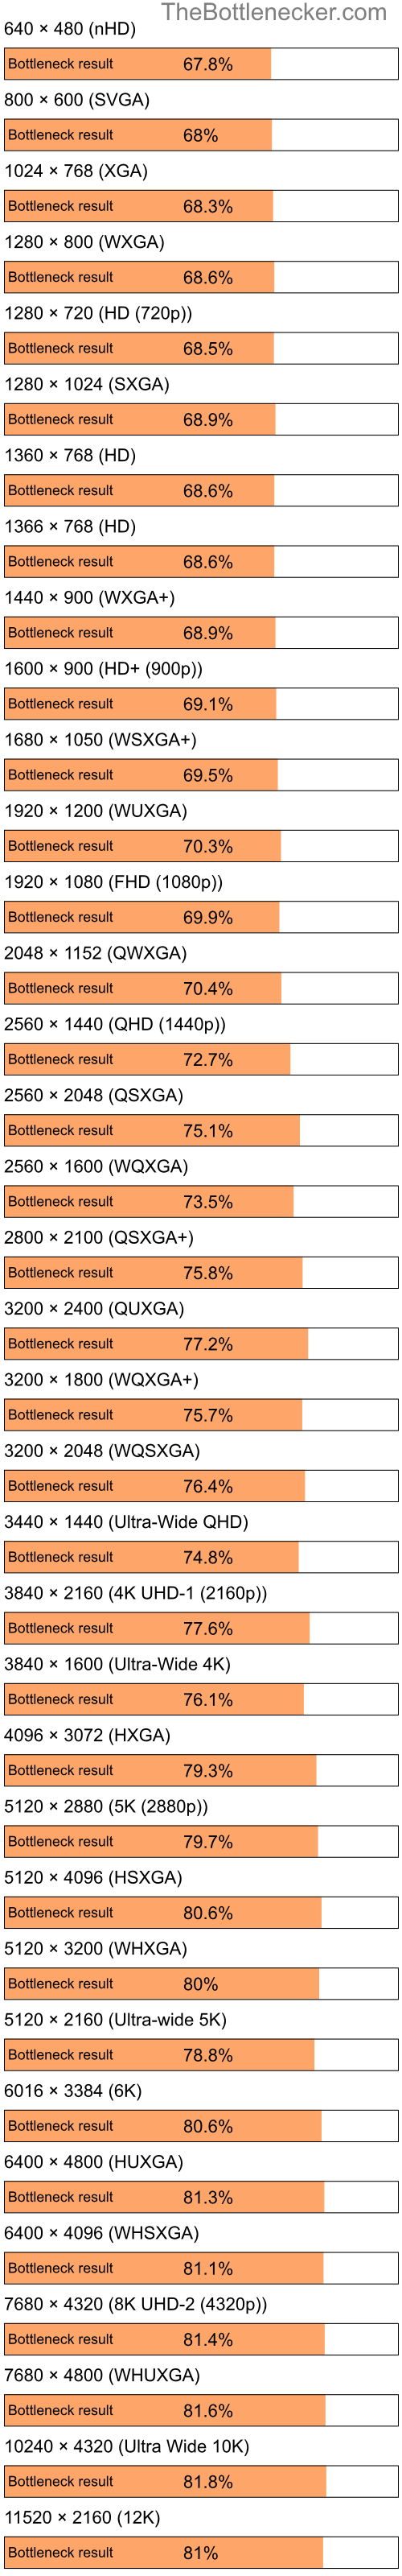 Bottleneck results by resolution for Intel Atom Z520 and Intel G45 in Graphic Card Intense Tasks